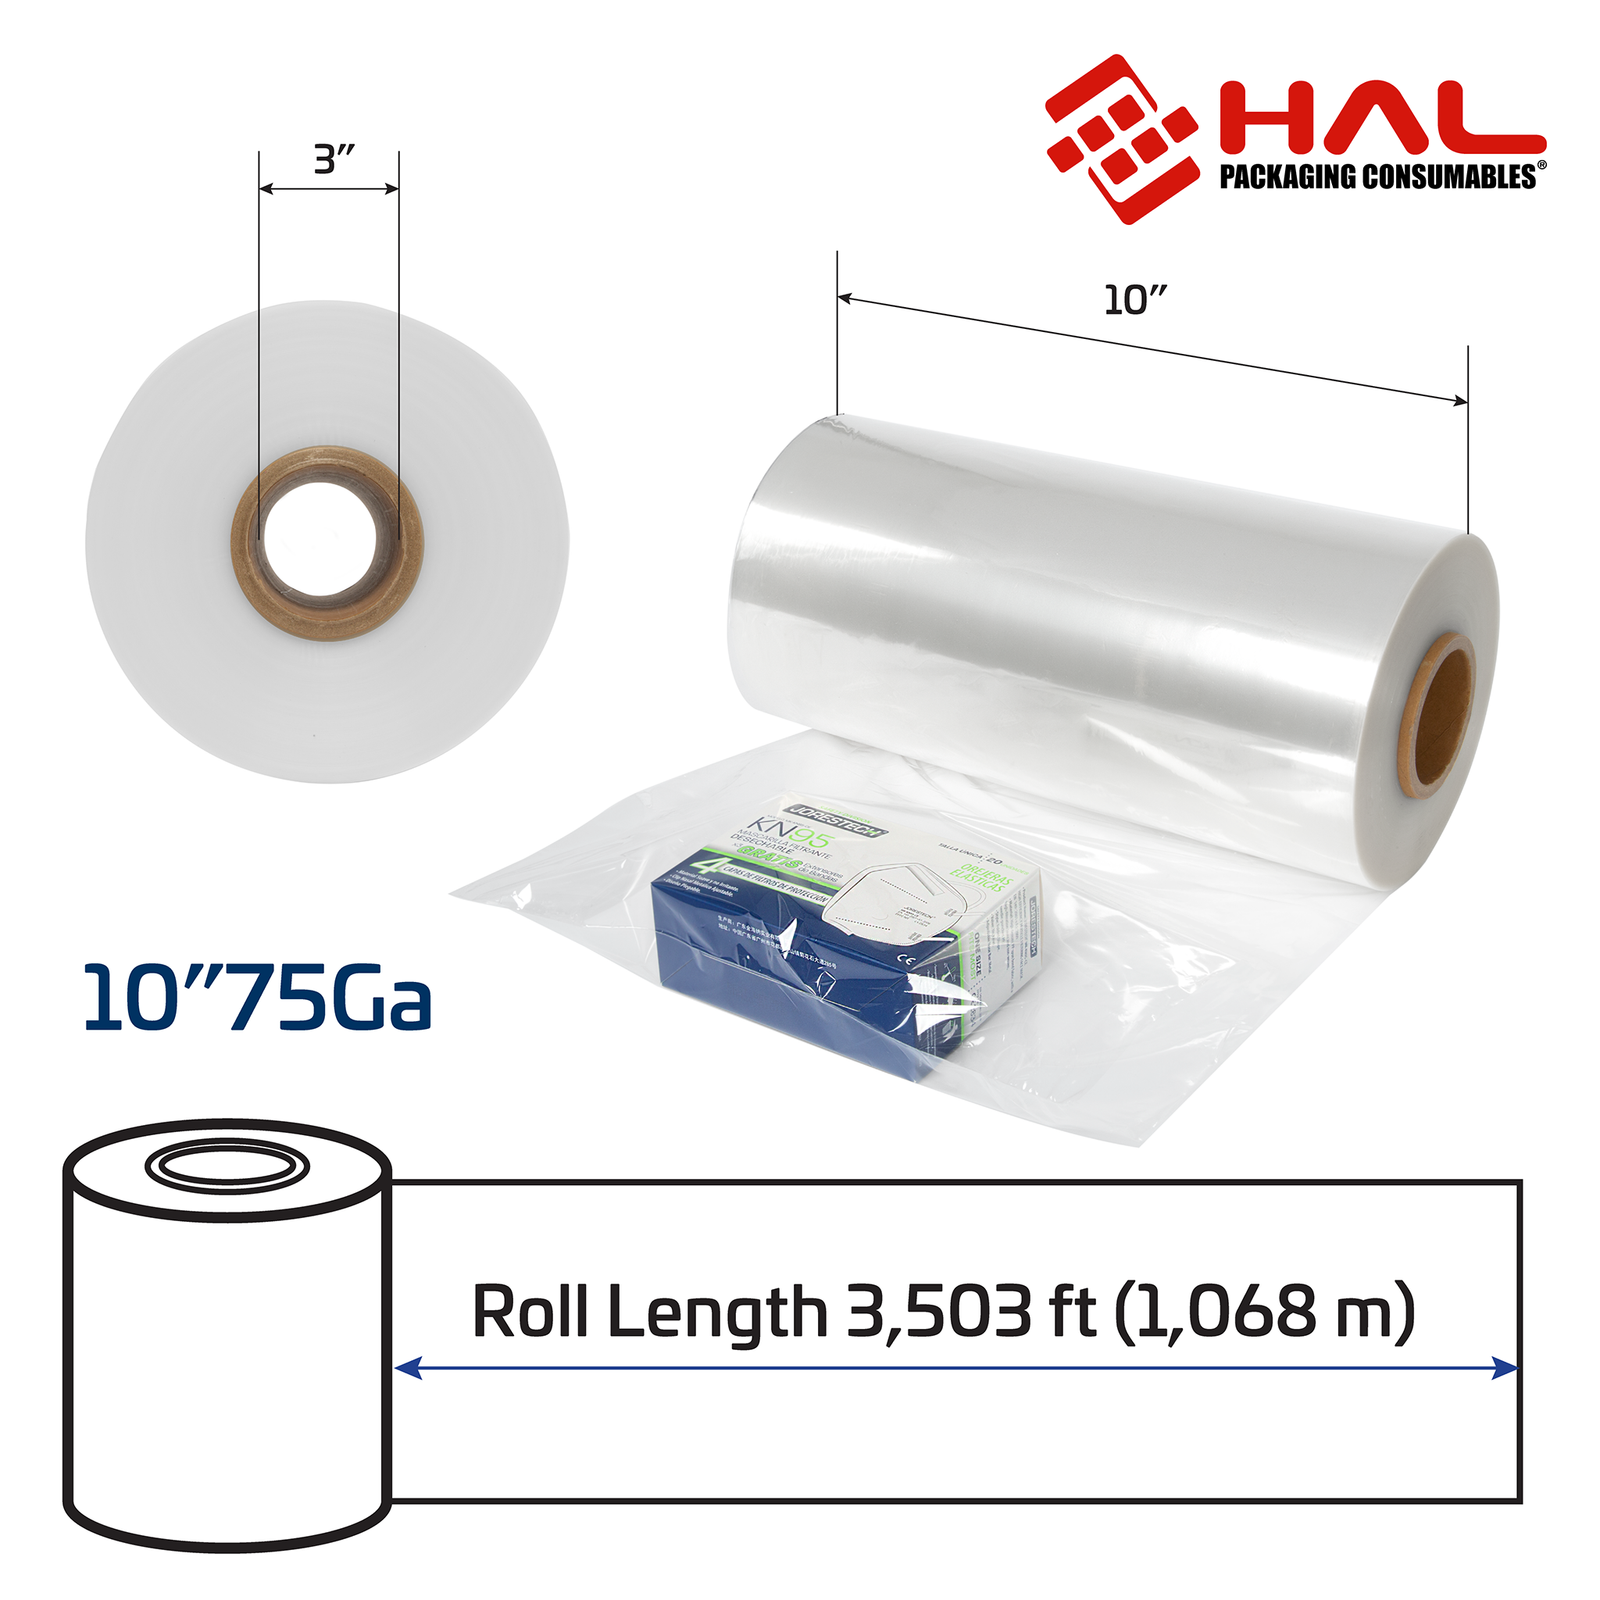 Measurements of the 75 gauge shrink wrapping film tube. 3 inch diameter of the inner core, and 10 inch width with a 3,503 ft. length (1,068 meters).